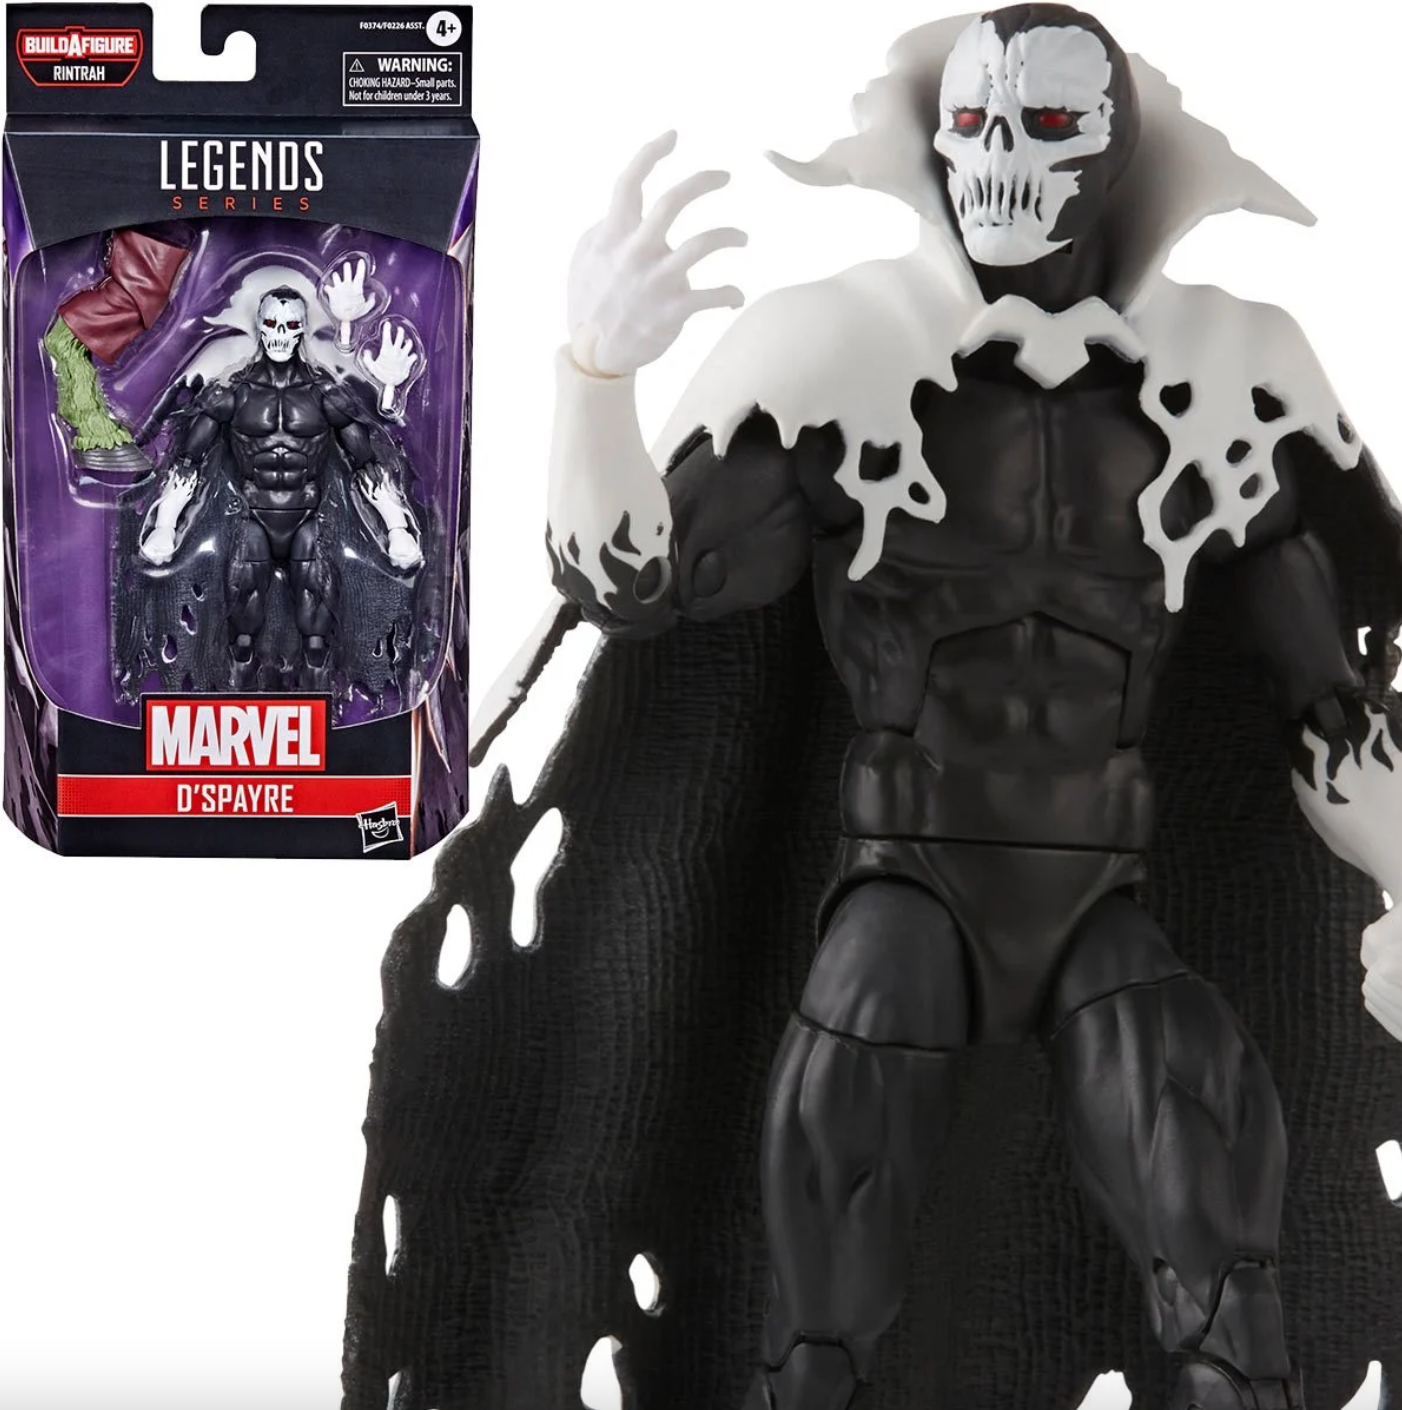 Marvel Legends D'Spayre figure from Doctor Strange in the Multiverse of Madness.